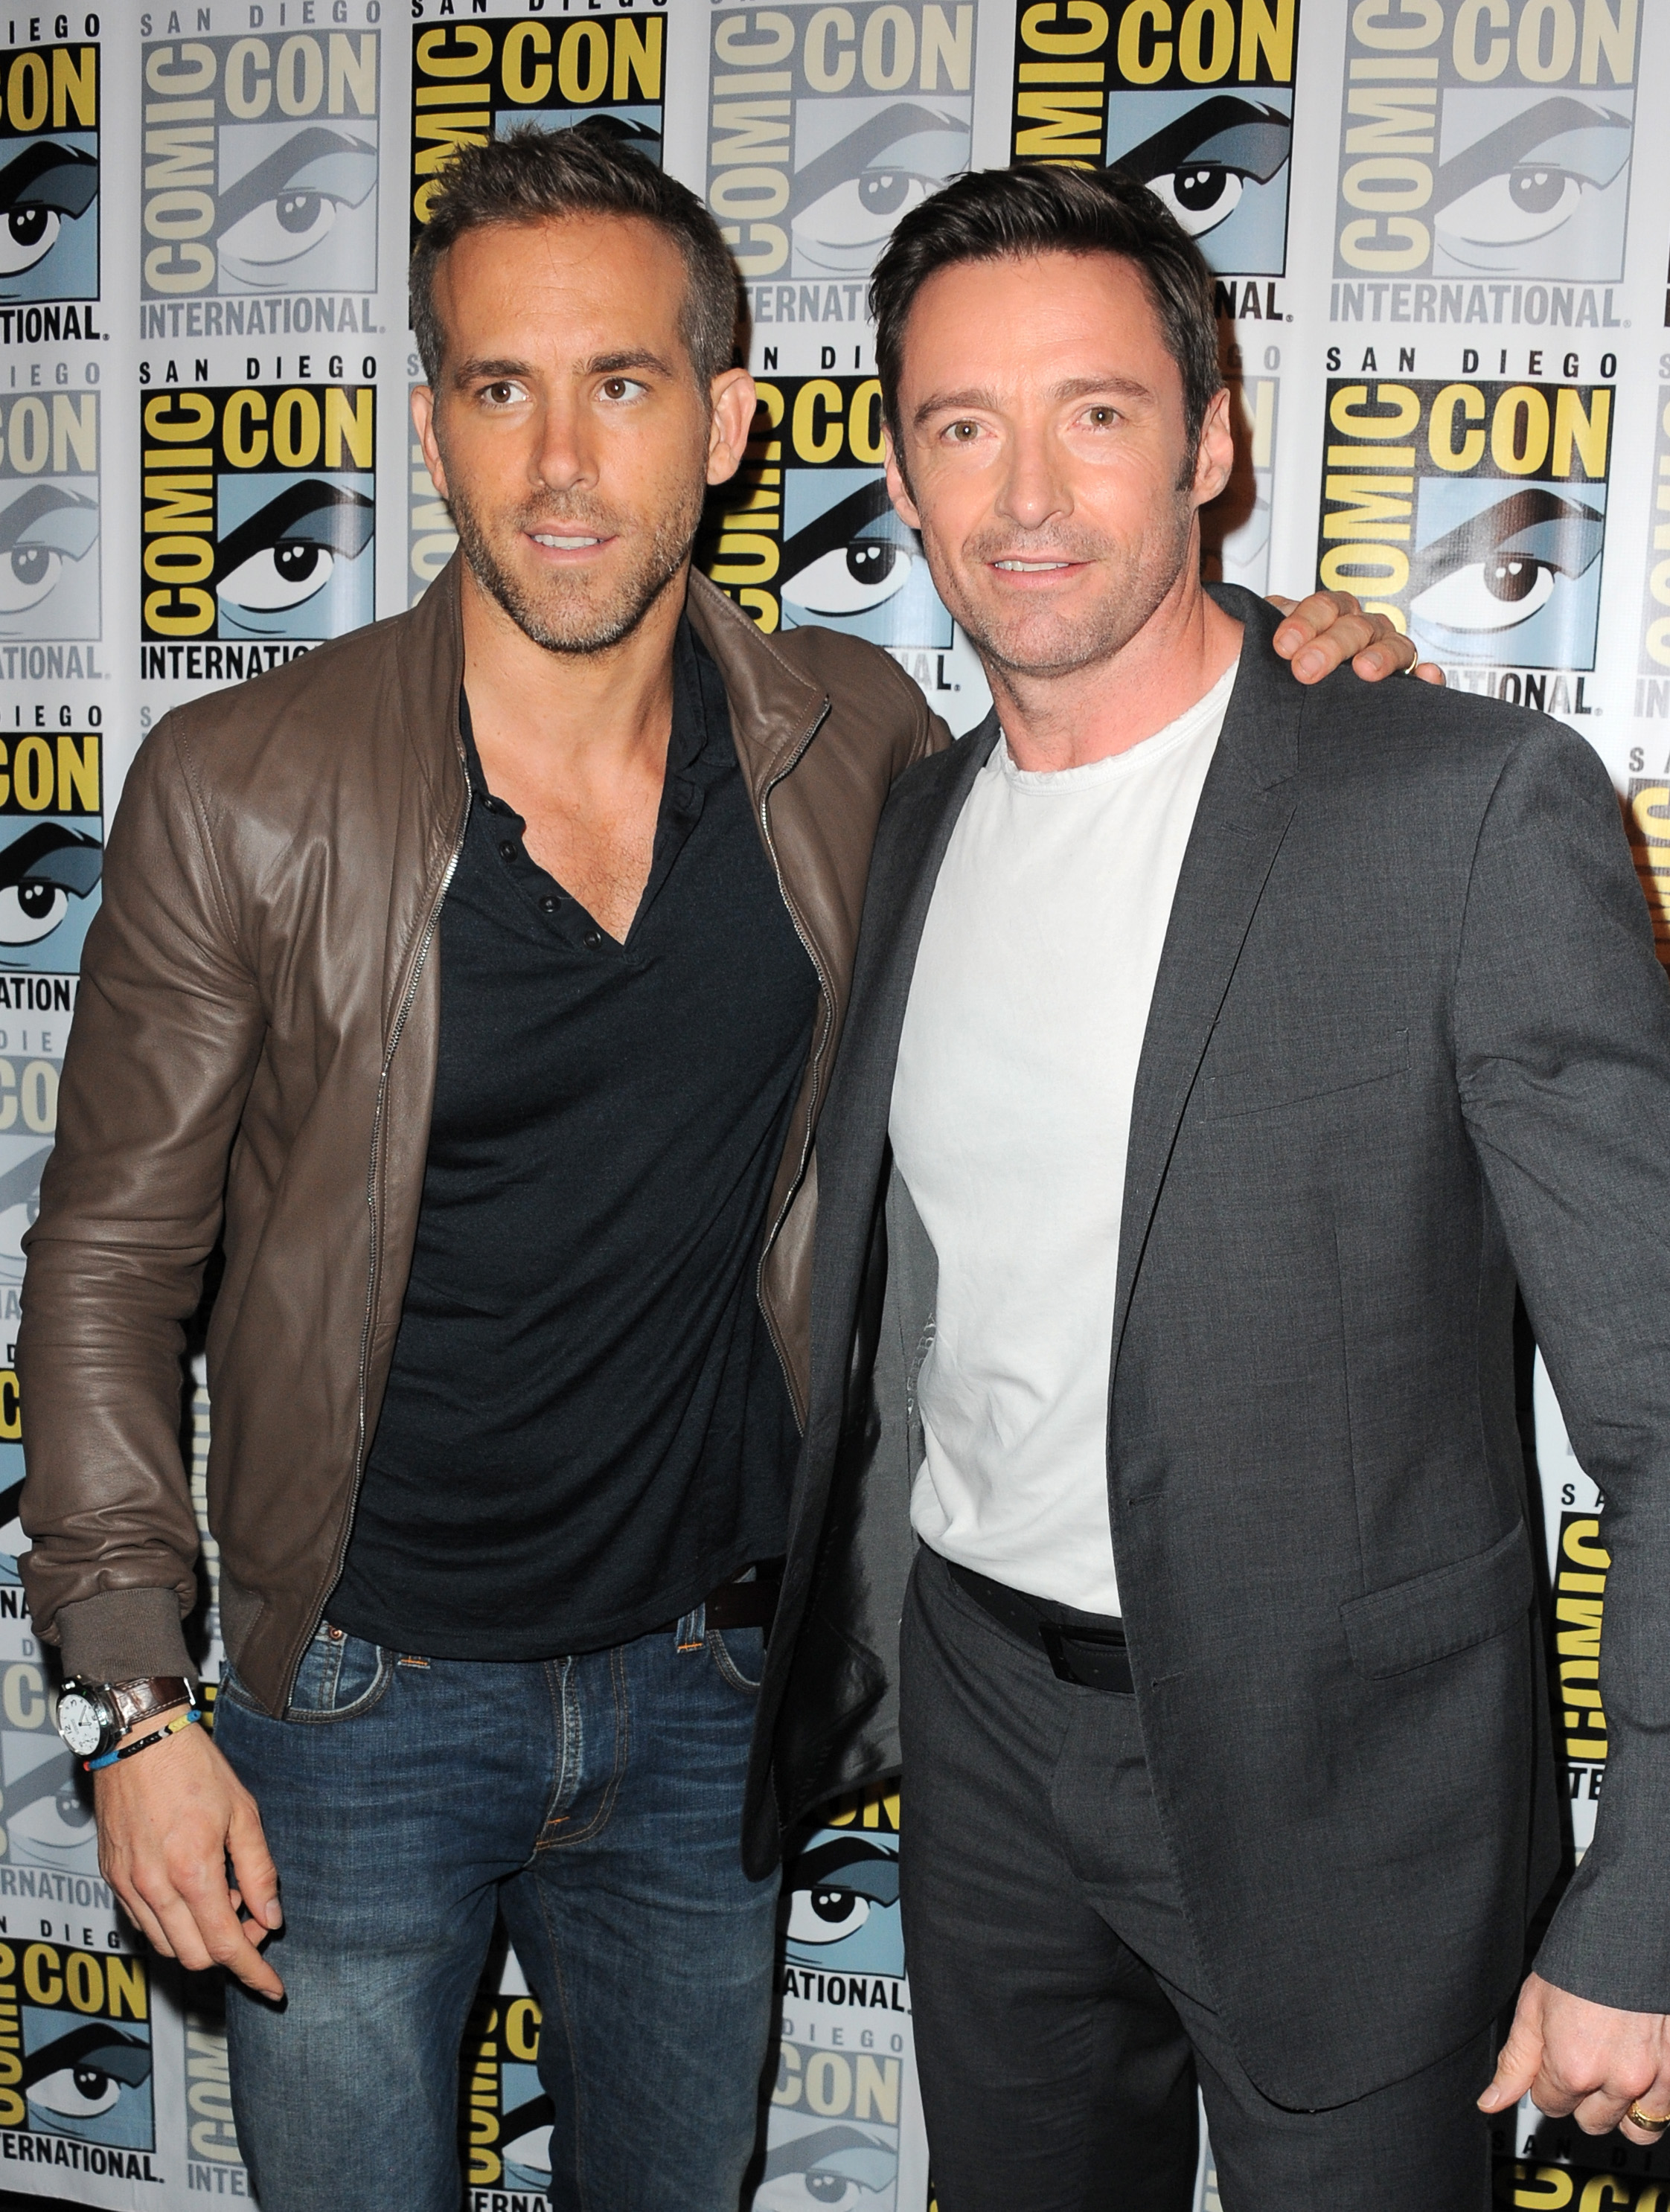 Ryan Reynolds and Hugh Jackman at the 20th Century Fox panel during Comic-Con International in San Diego, California on July 11, 2015 | Source: Getty Images